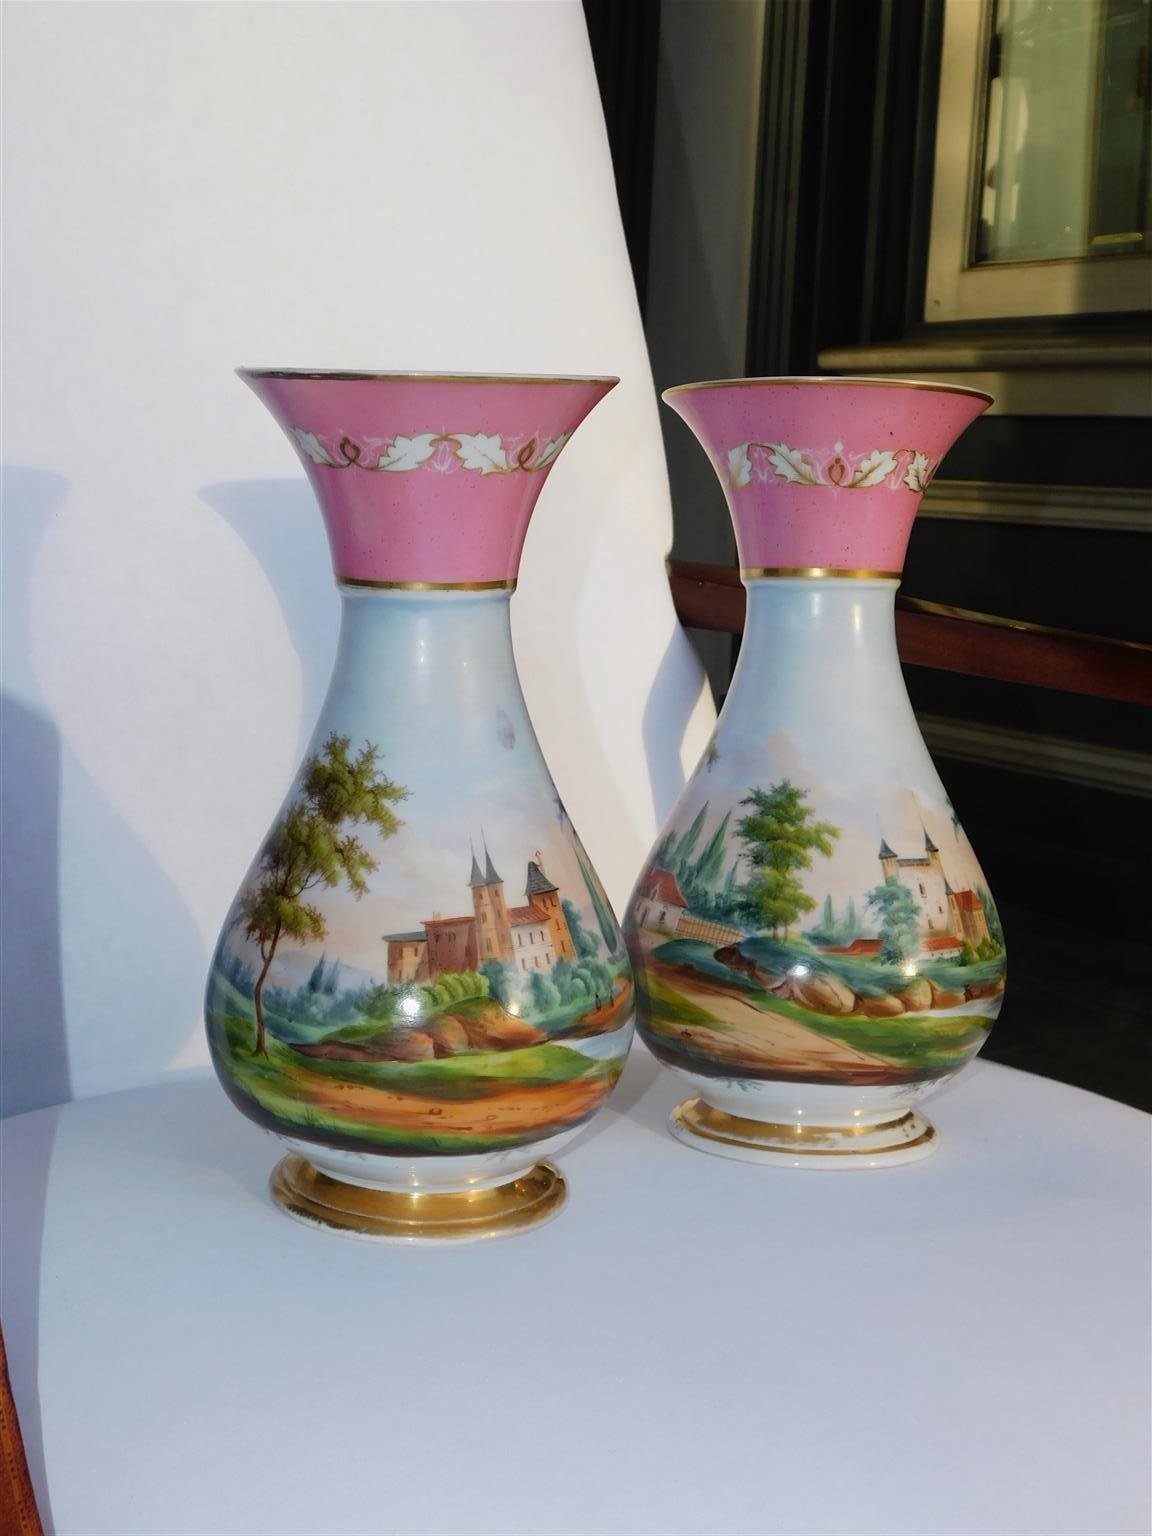 Pair of French Old Paris hand painted porcelain vases with scenic landscapes, Mid 19th Century
Dimensions of each are 12 Tall / 4.5 Diameter at Base / 5.25 Diameter at Top / 6 Diameter at Middle.